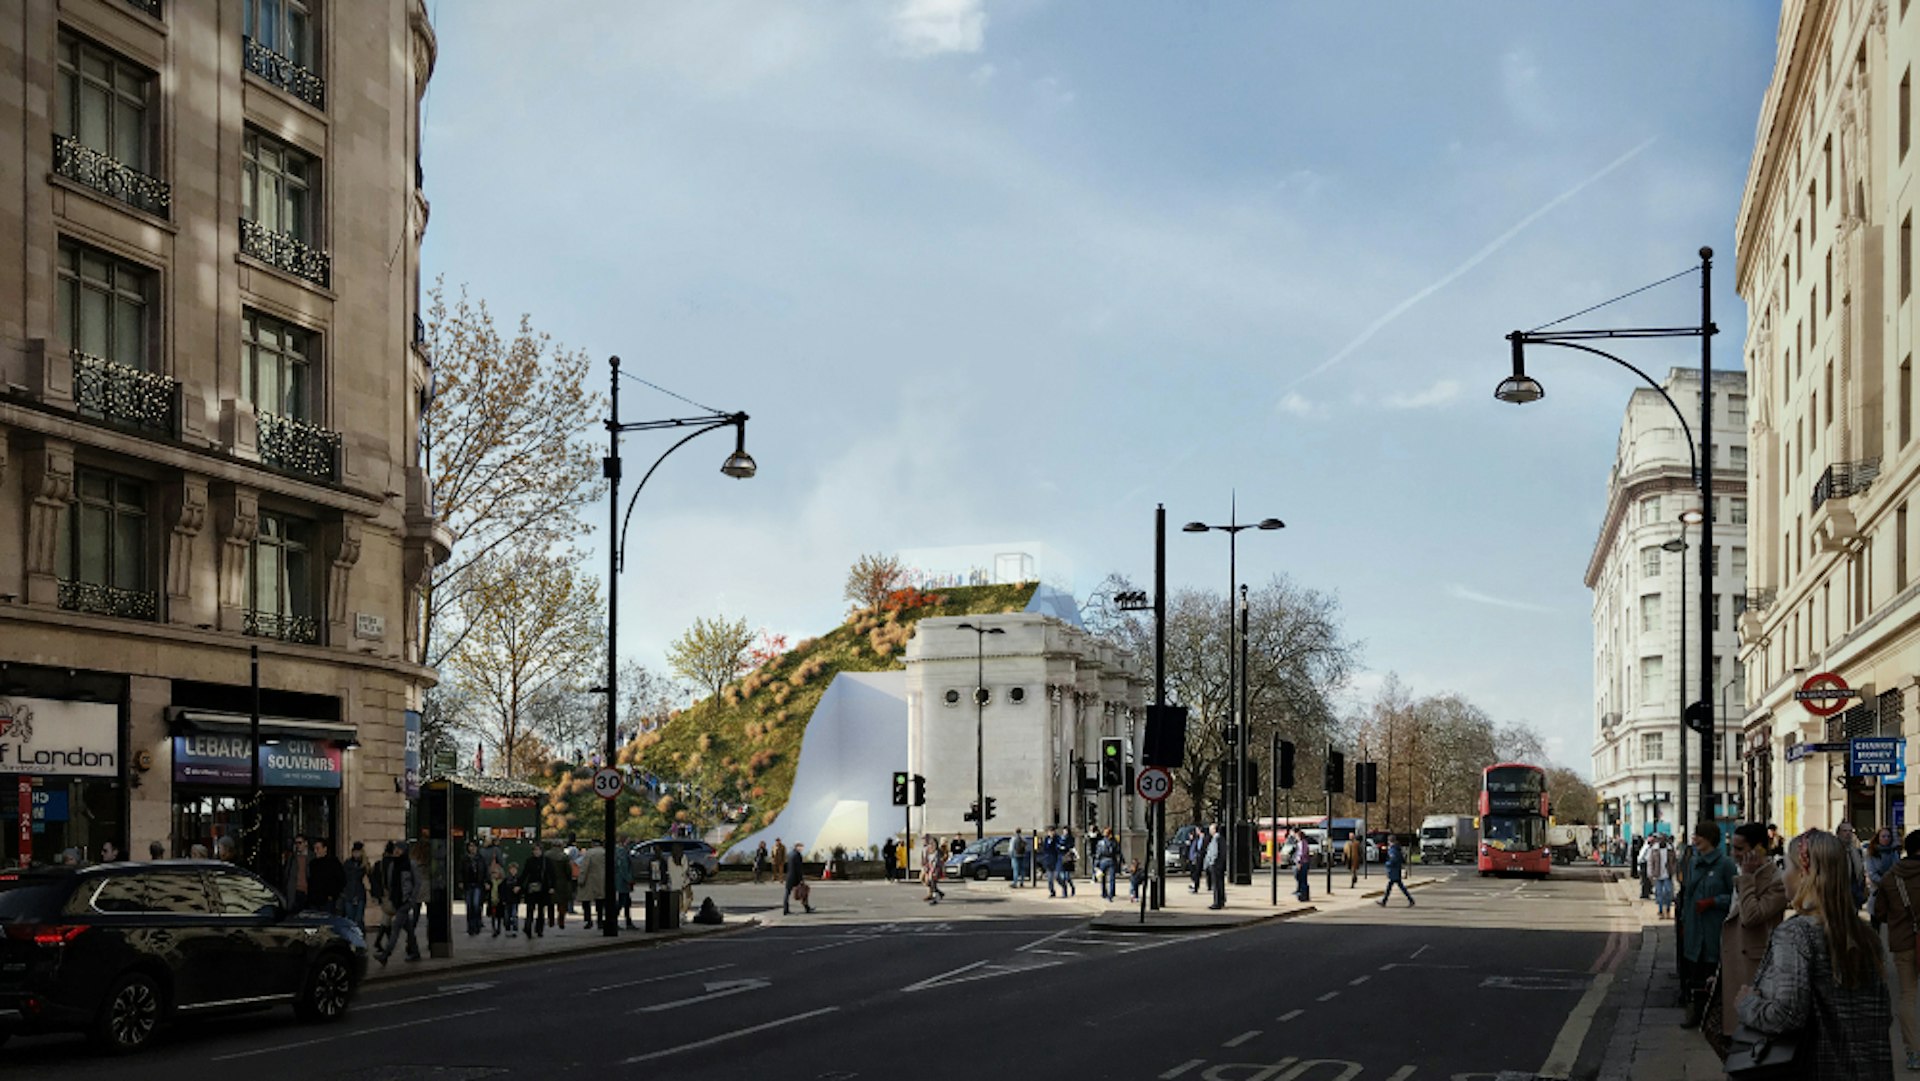 A rendering of the Marble Arch Hill installation in London